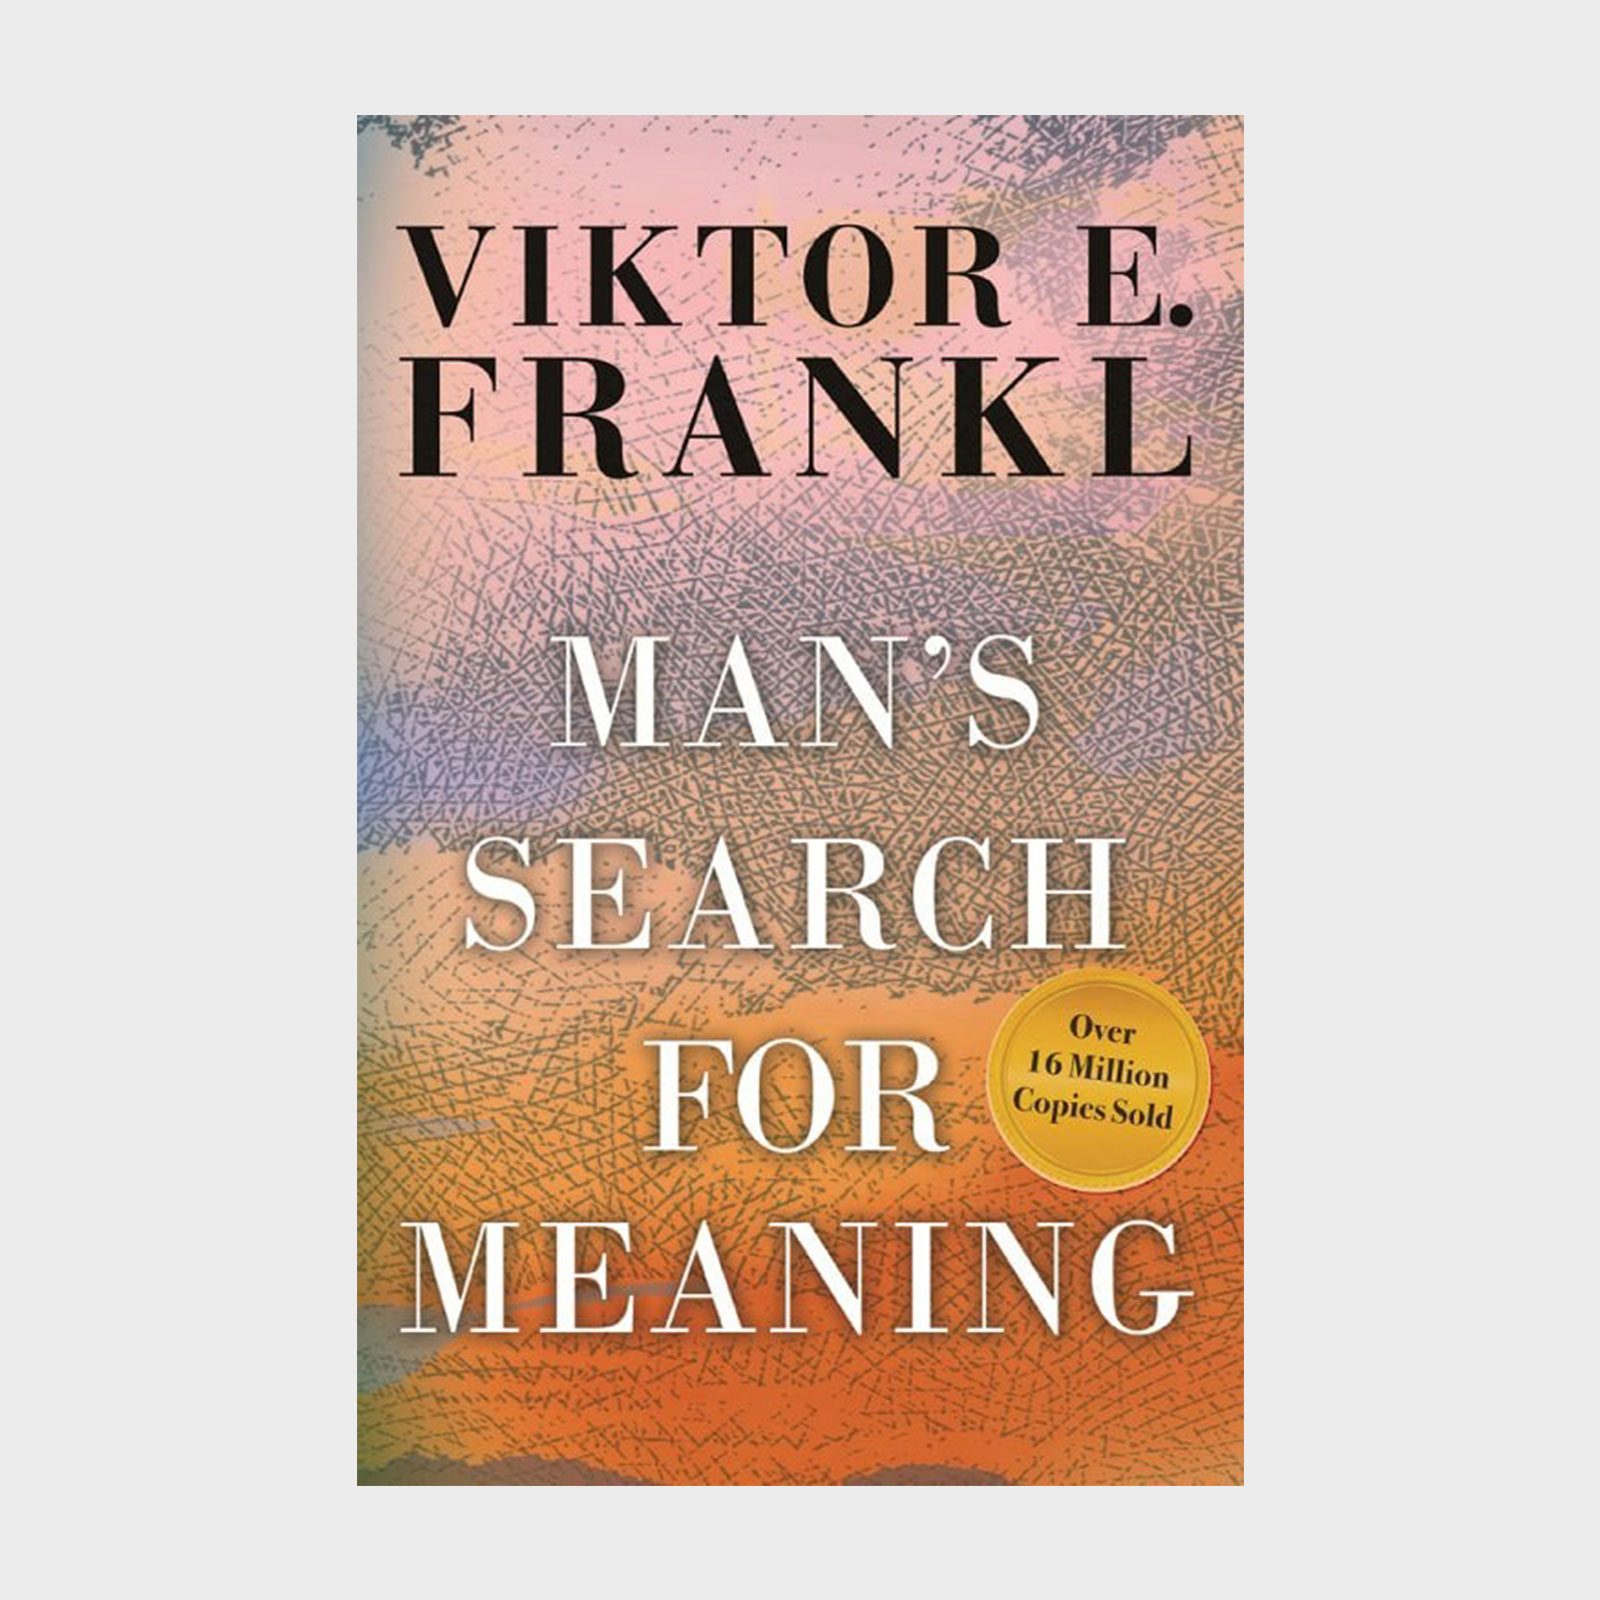 <p>This 1946 international bestseller reveals the unimaginable hardship that psychiatrist Viktor Frankl endured during his time in the Nazi concentration camps. Through his own recollection in <a href="https://bookshop.org/p/books/man-s-search-for-meaning-viktor-e-frankl/8996943?ean=9780807014271" rel="noopener"><em>Man's Search for Meaning</em></a>, Frankl offers a riveting story of physical and spiritual survival, arguing that at the heart of human survival, it's not pleasure that drives us but the pursuit of what we find meaningful, especially during bleak and hopeless times. His text will inspire readers to find significance in their own lives, despite any challenges that arise.</p> <p class="listicle-page__cta-button-shop"><a class="shop-btn" href="https://bookshop.org/p/books/man-s-search-for-meaning-viktor-e-frankl/8996943?ean=9780807014271">Shop Now</a></p>